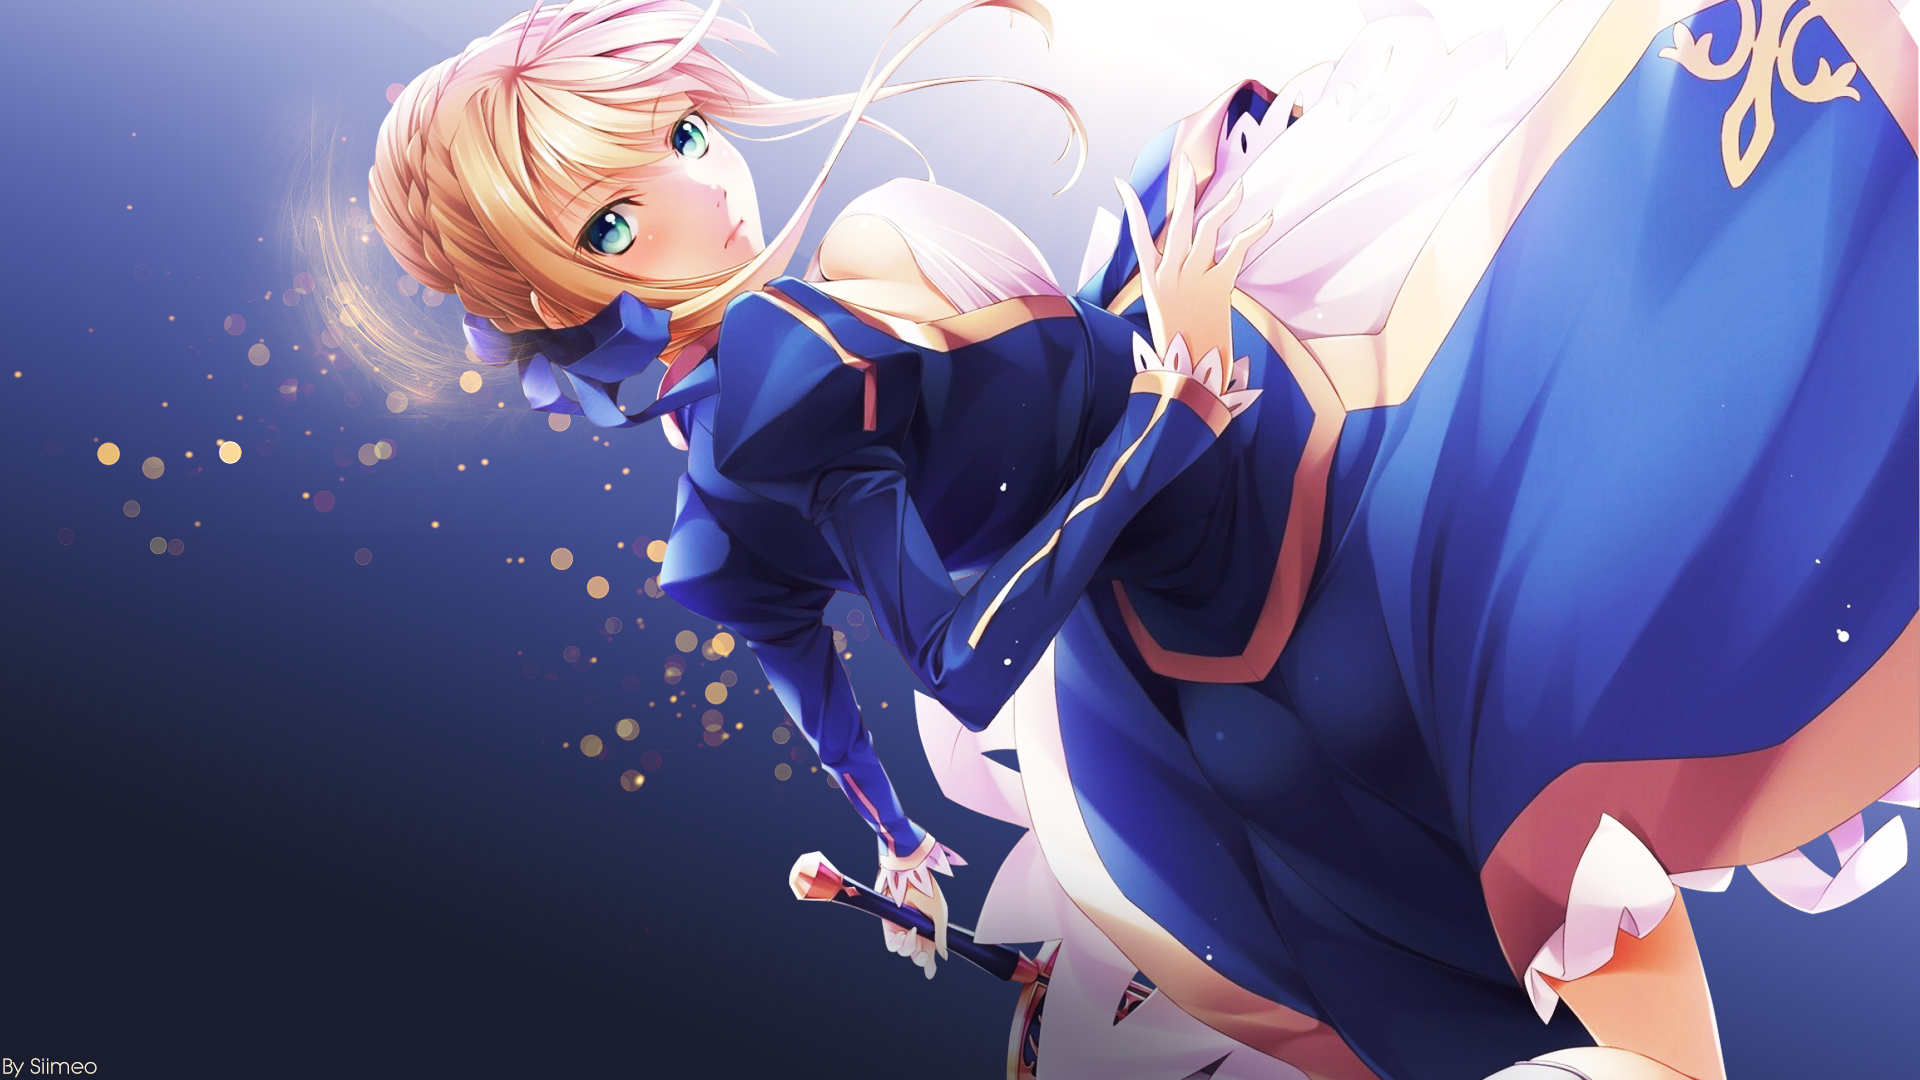 Saber - Fate/Stay Night Wallpaper by Siimeo on DeviantArt